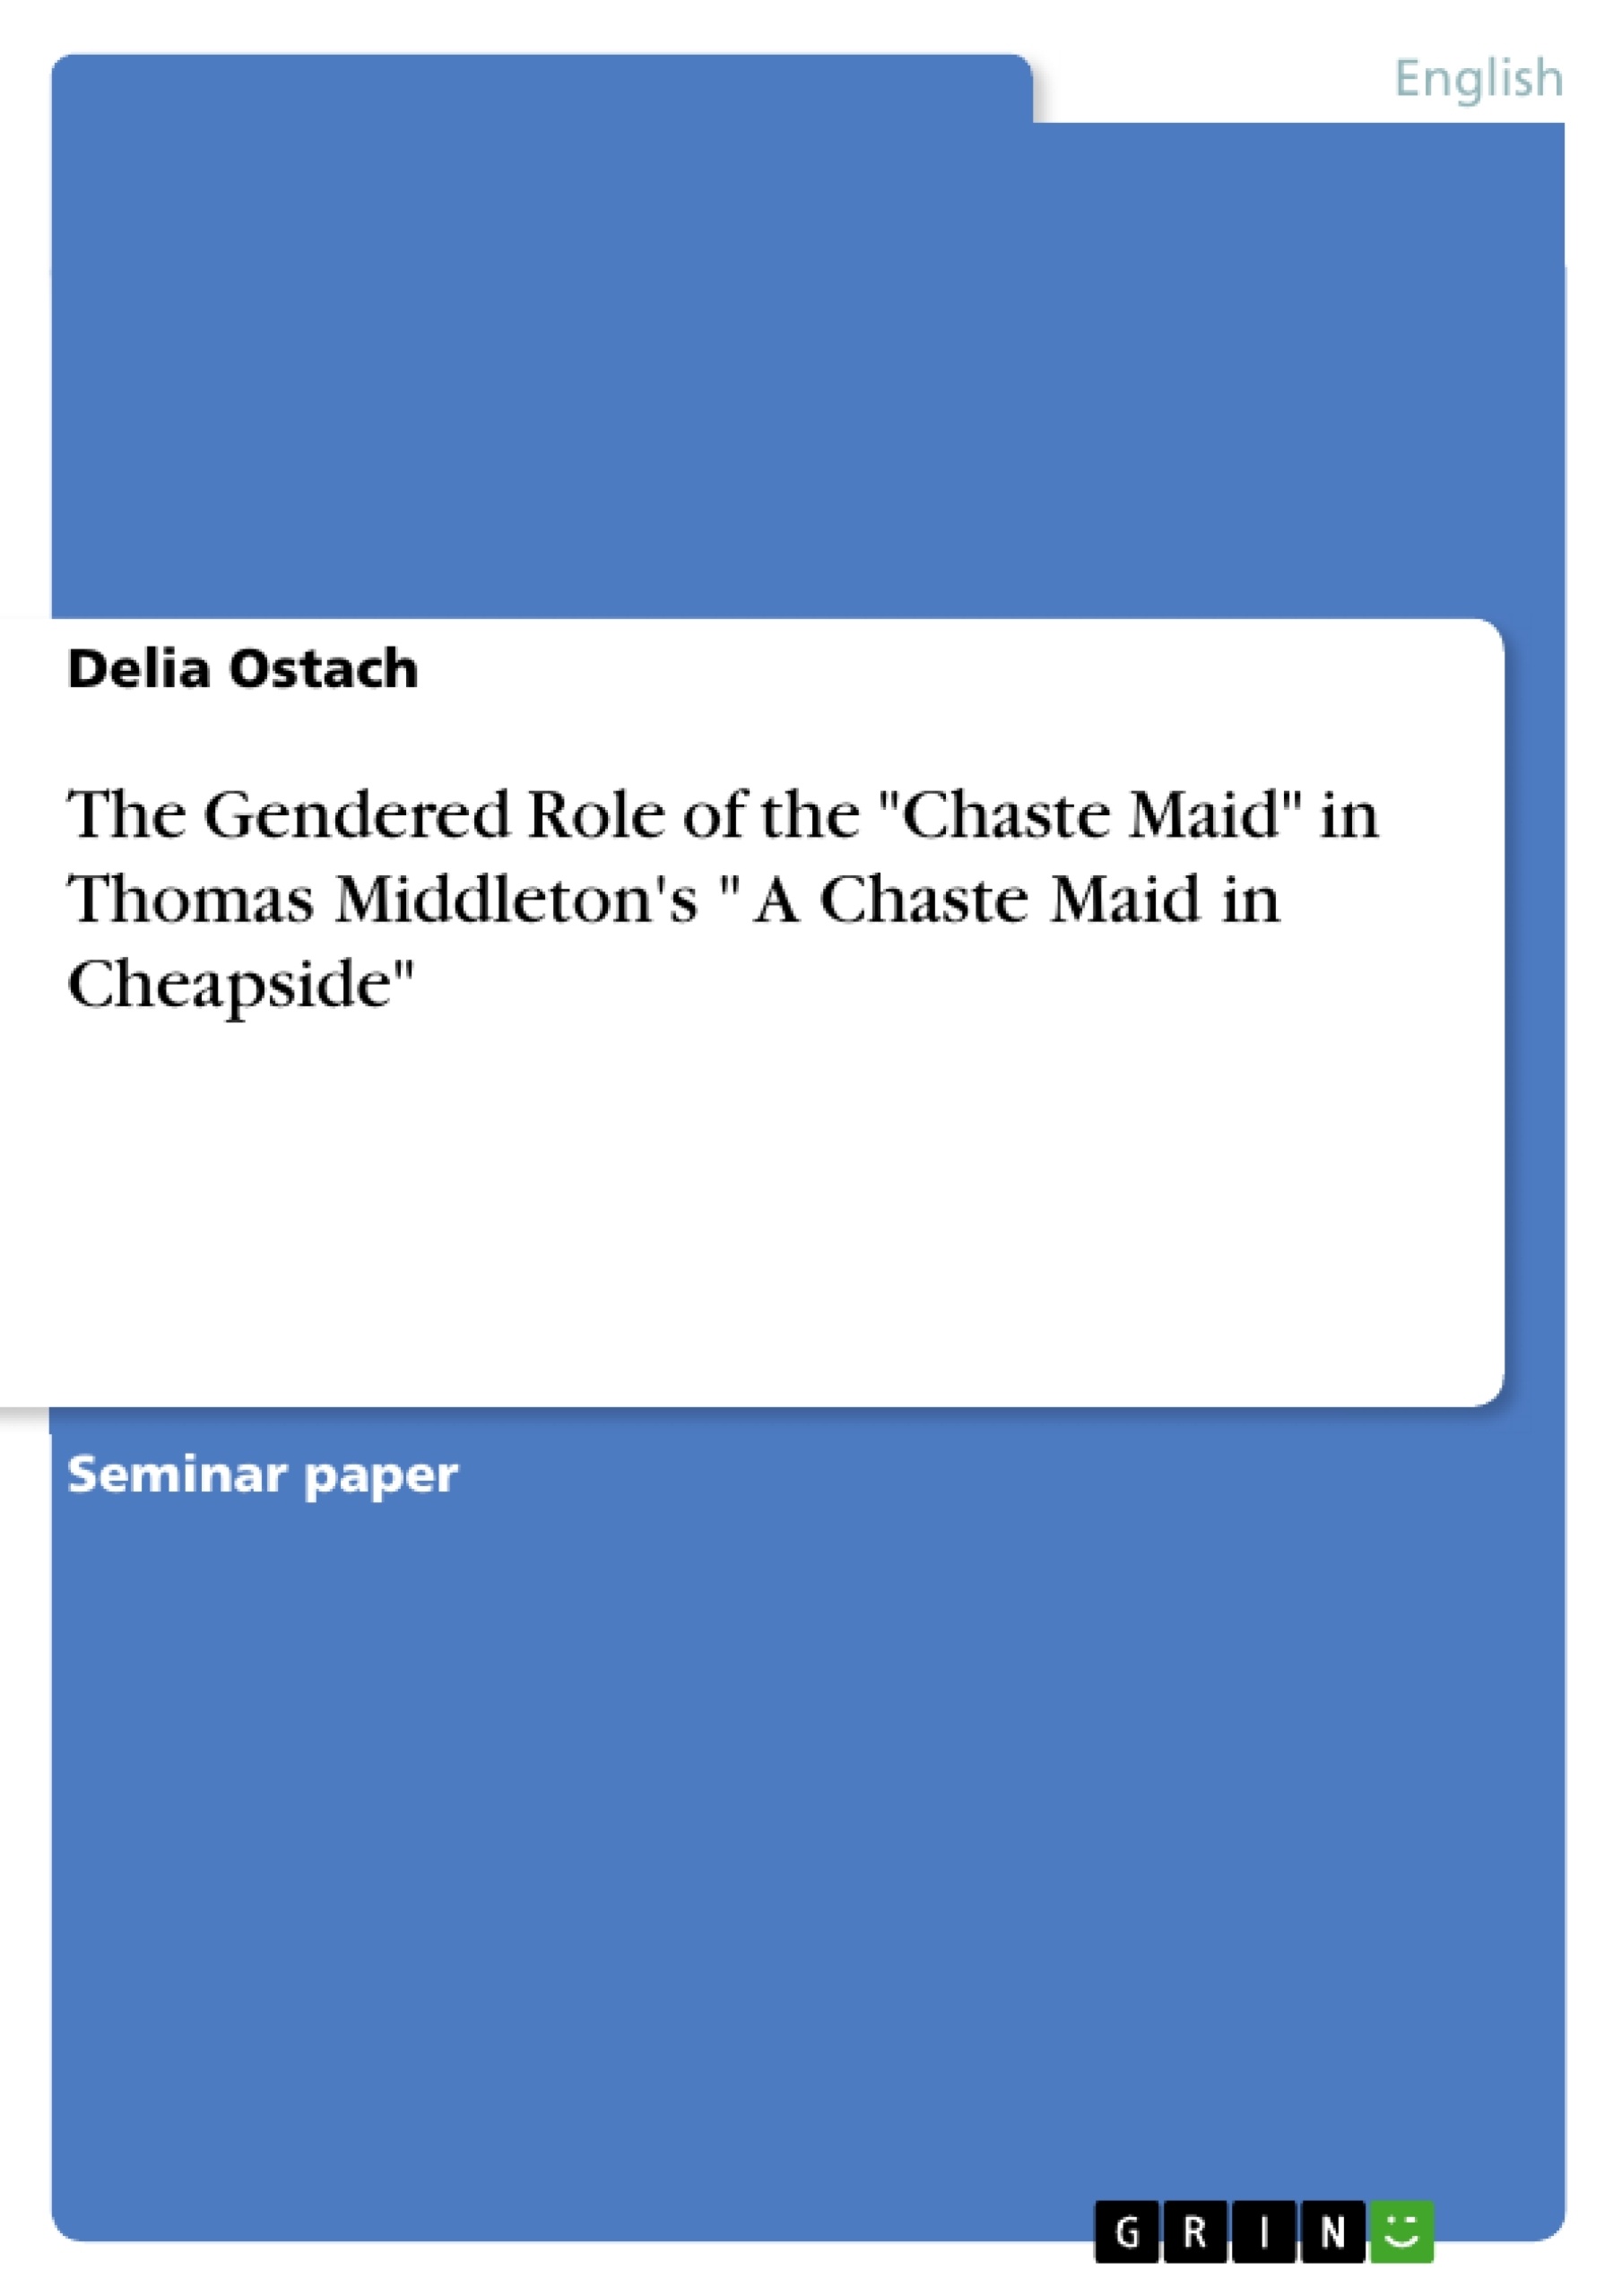 Titel: The Gendered Role of the "Chaste Maid" in Thomas Middleton's " A Chaste Maid in Cheapside"